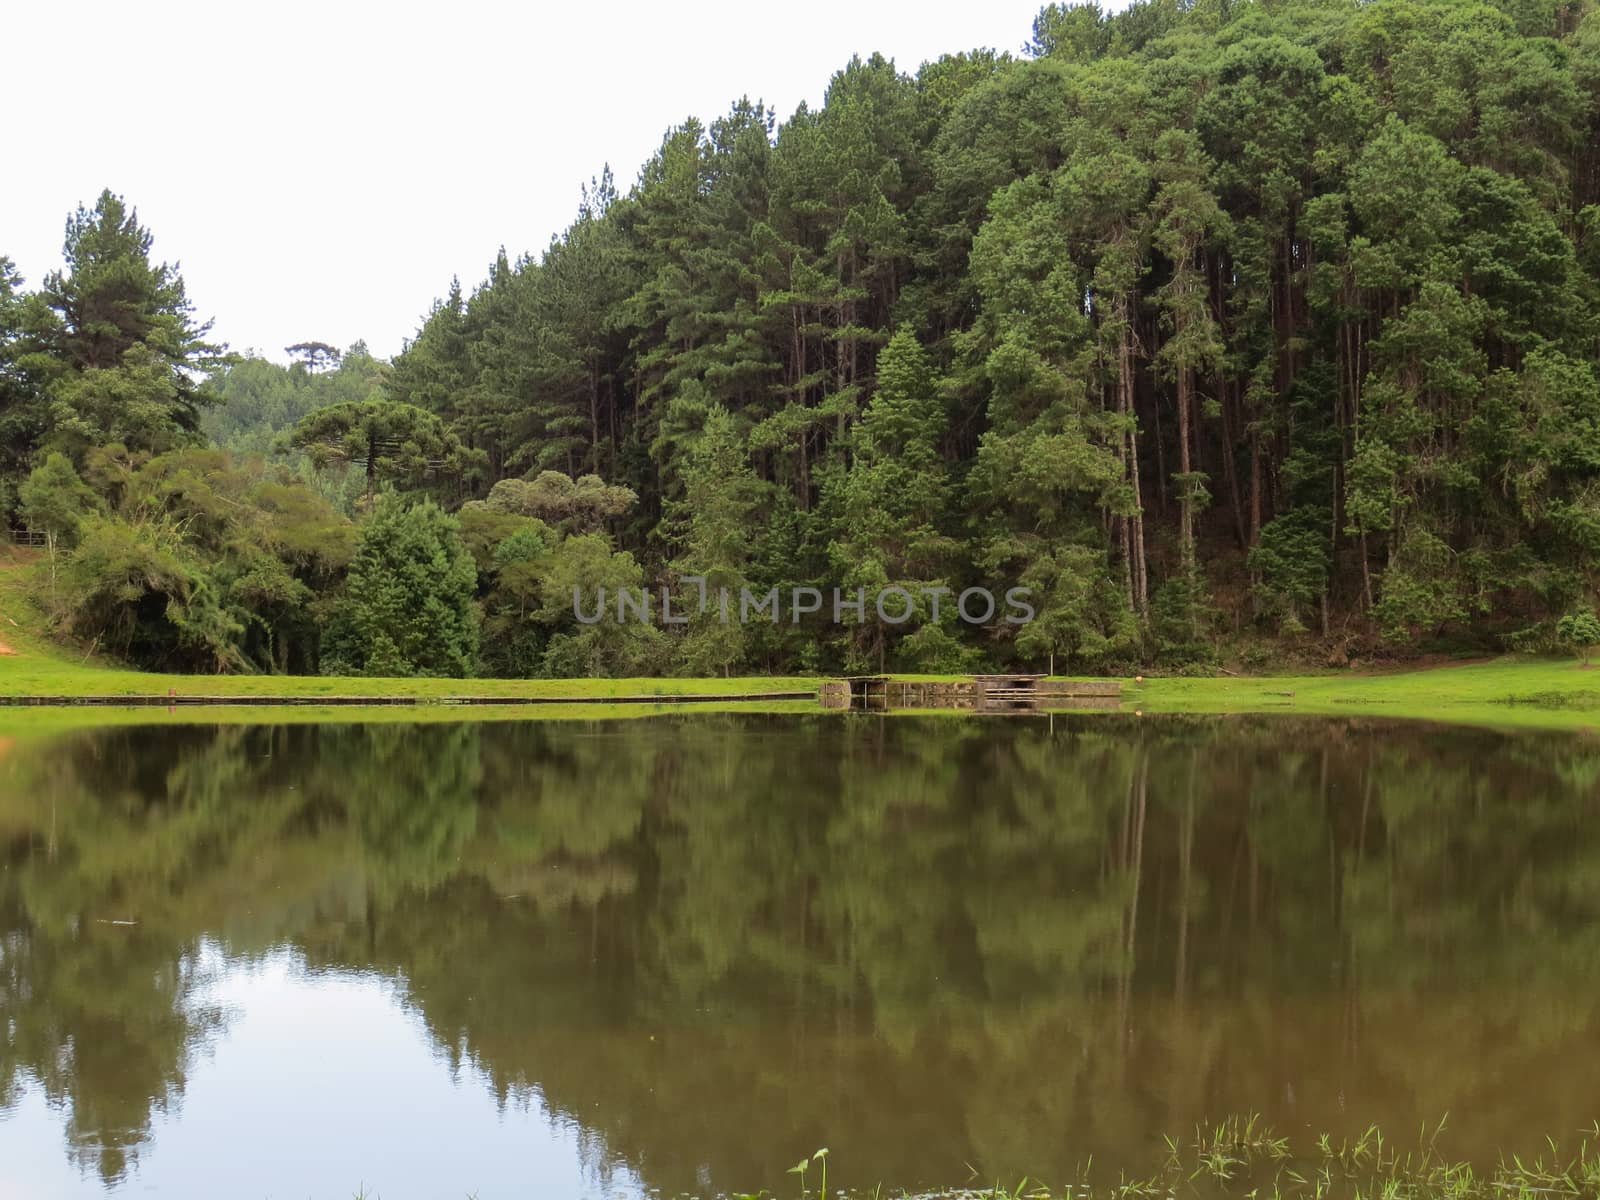 Tranquil lake with grass around it and with reflection of pine forest in the background.